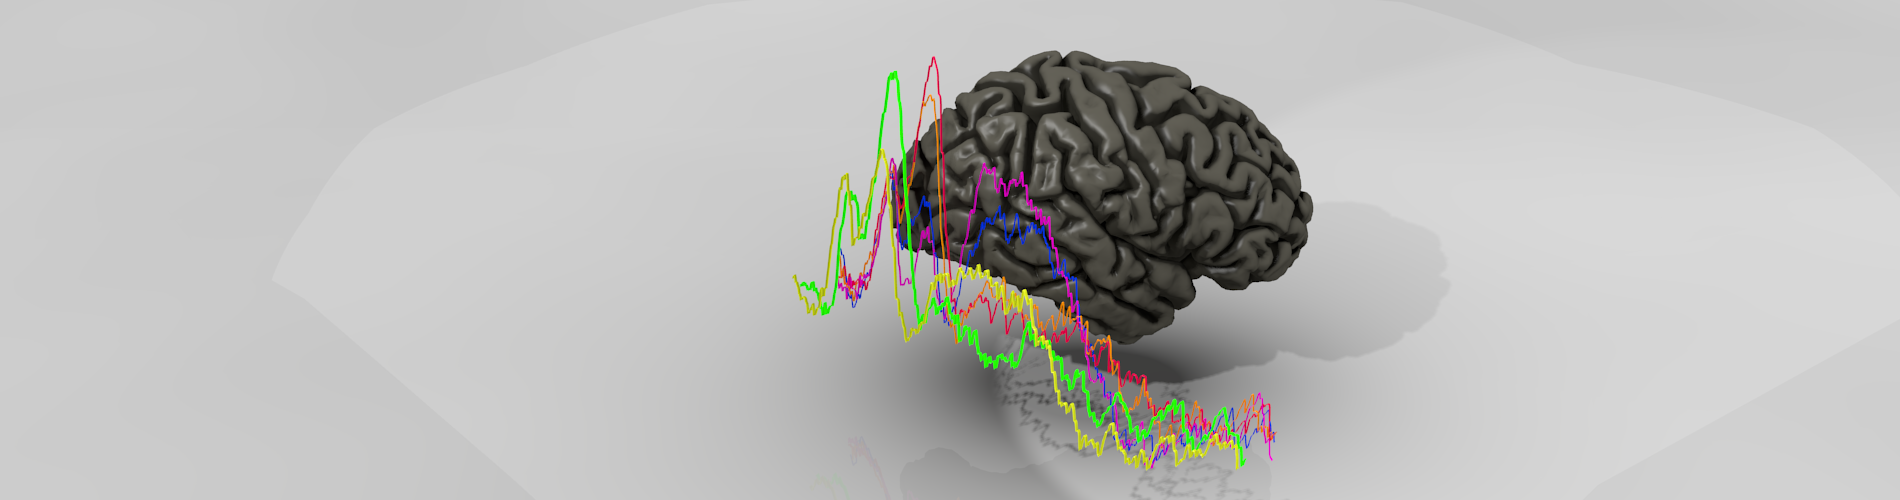 Matlab for Psychology and Neuroscience course feature image